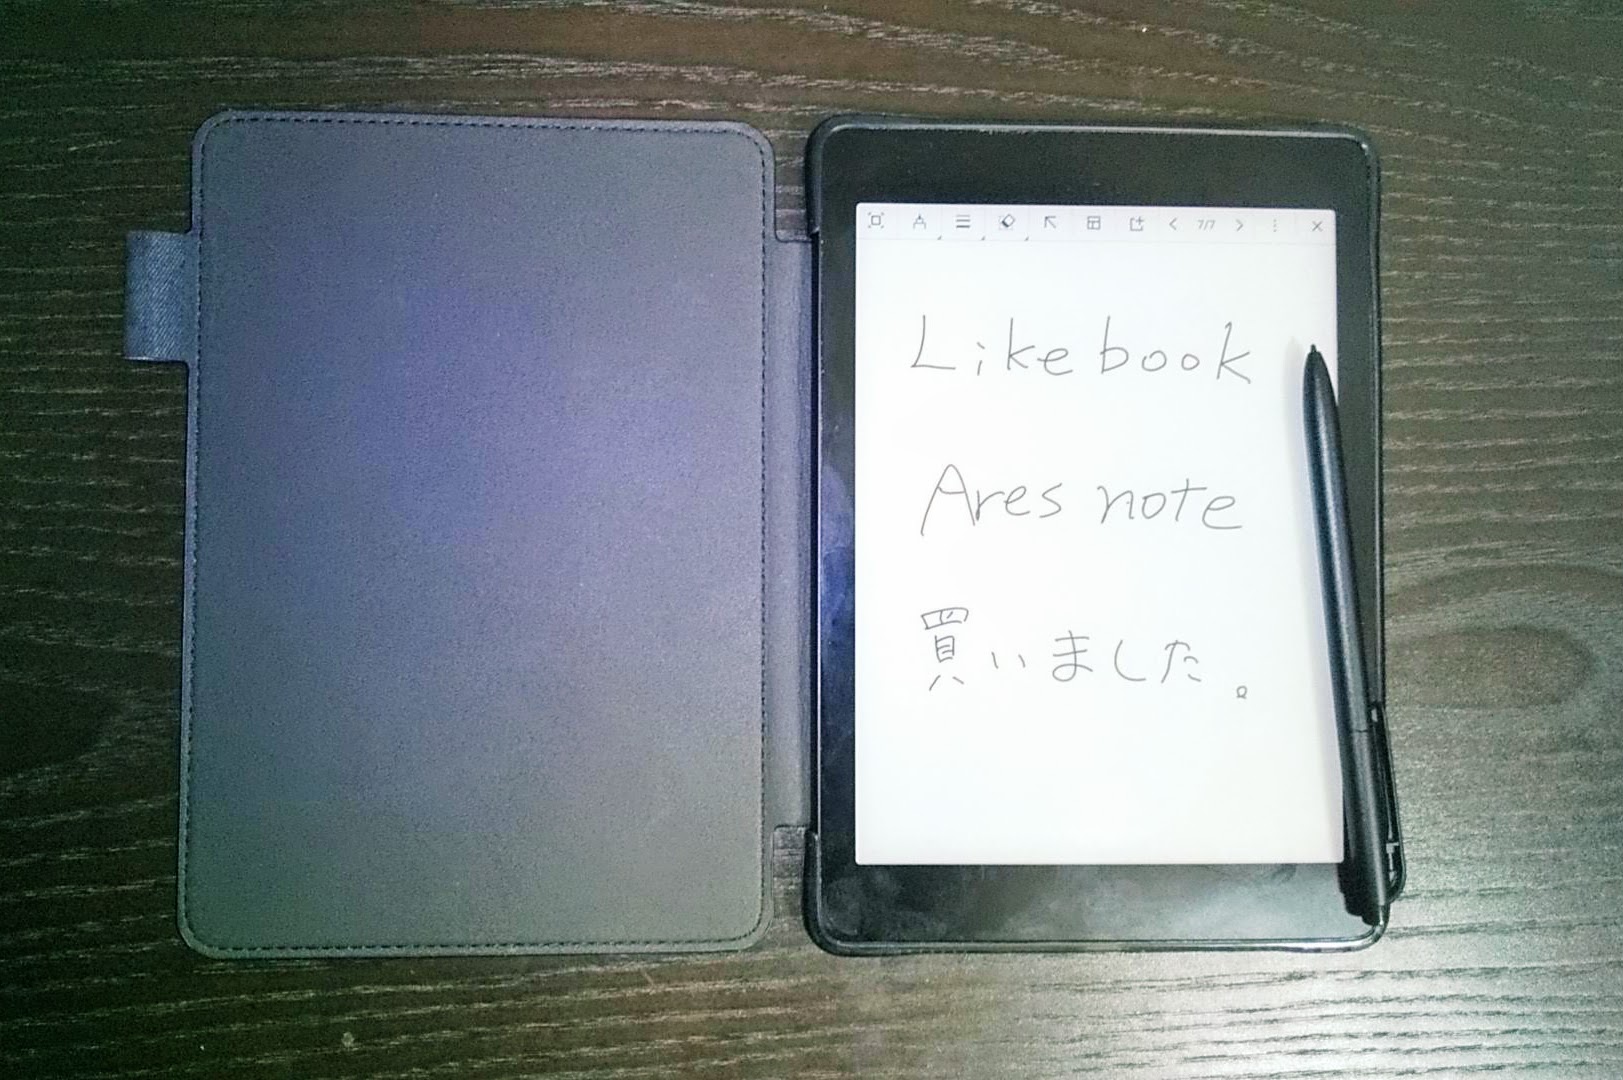 Likebook Ares note（7.8インチEinkタブレット）を買ったのでレビュー 